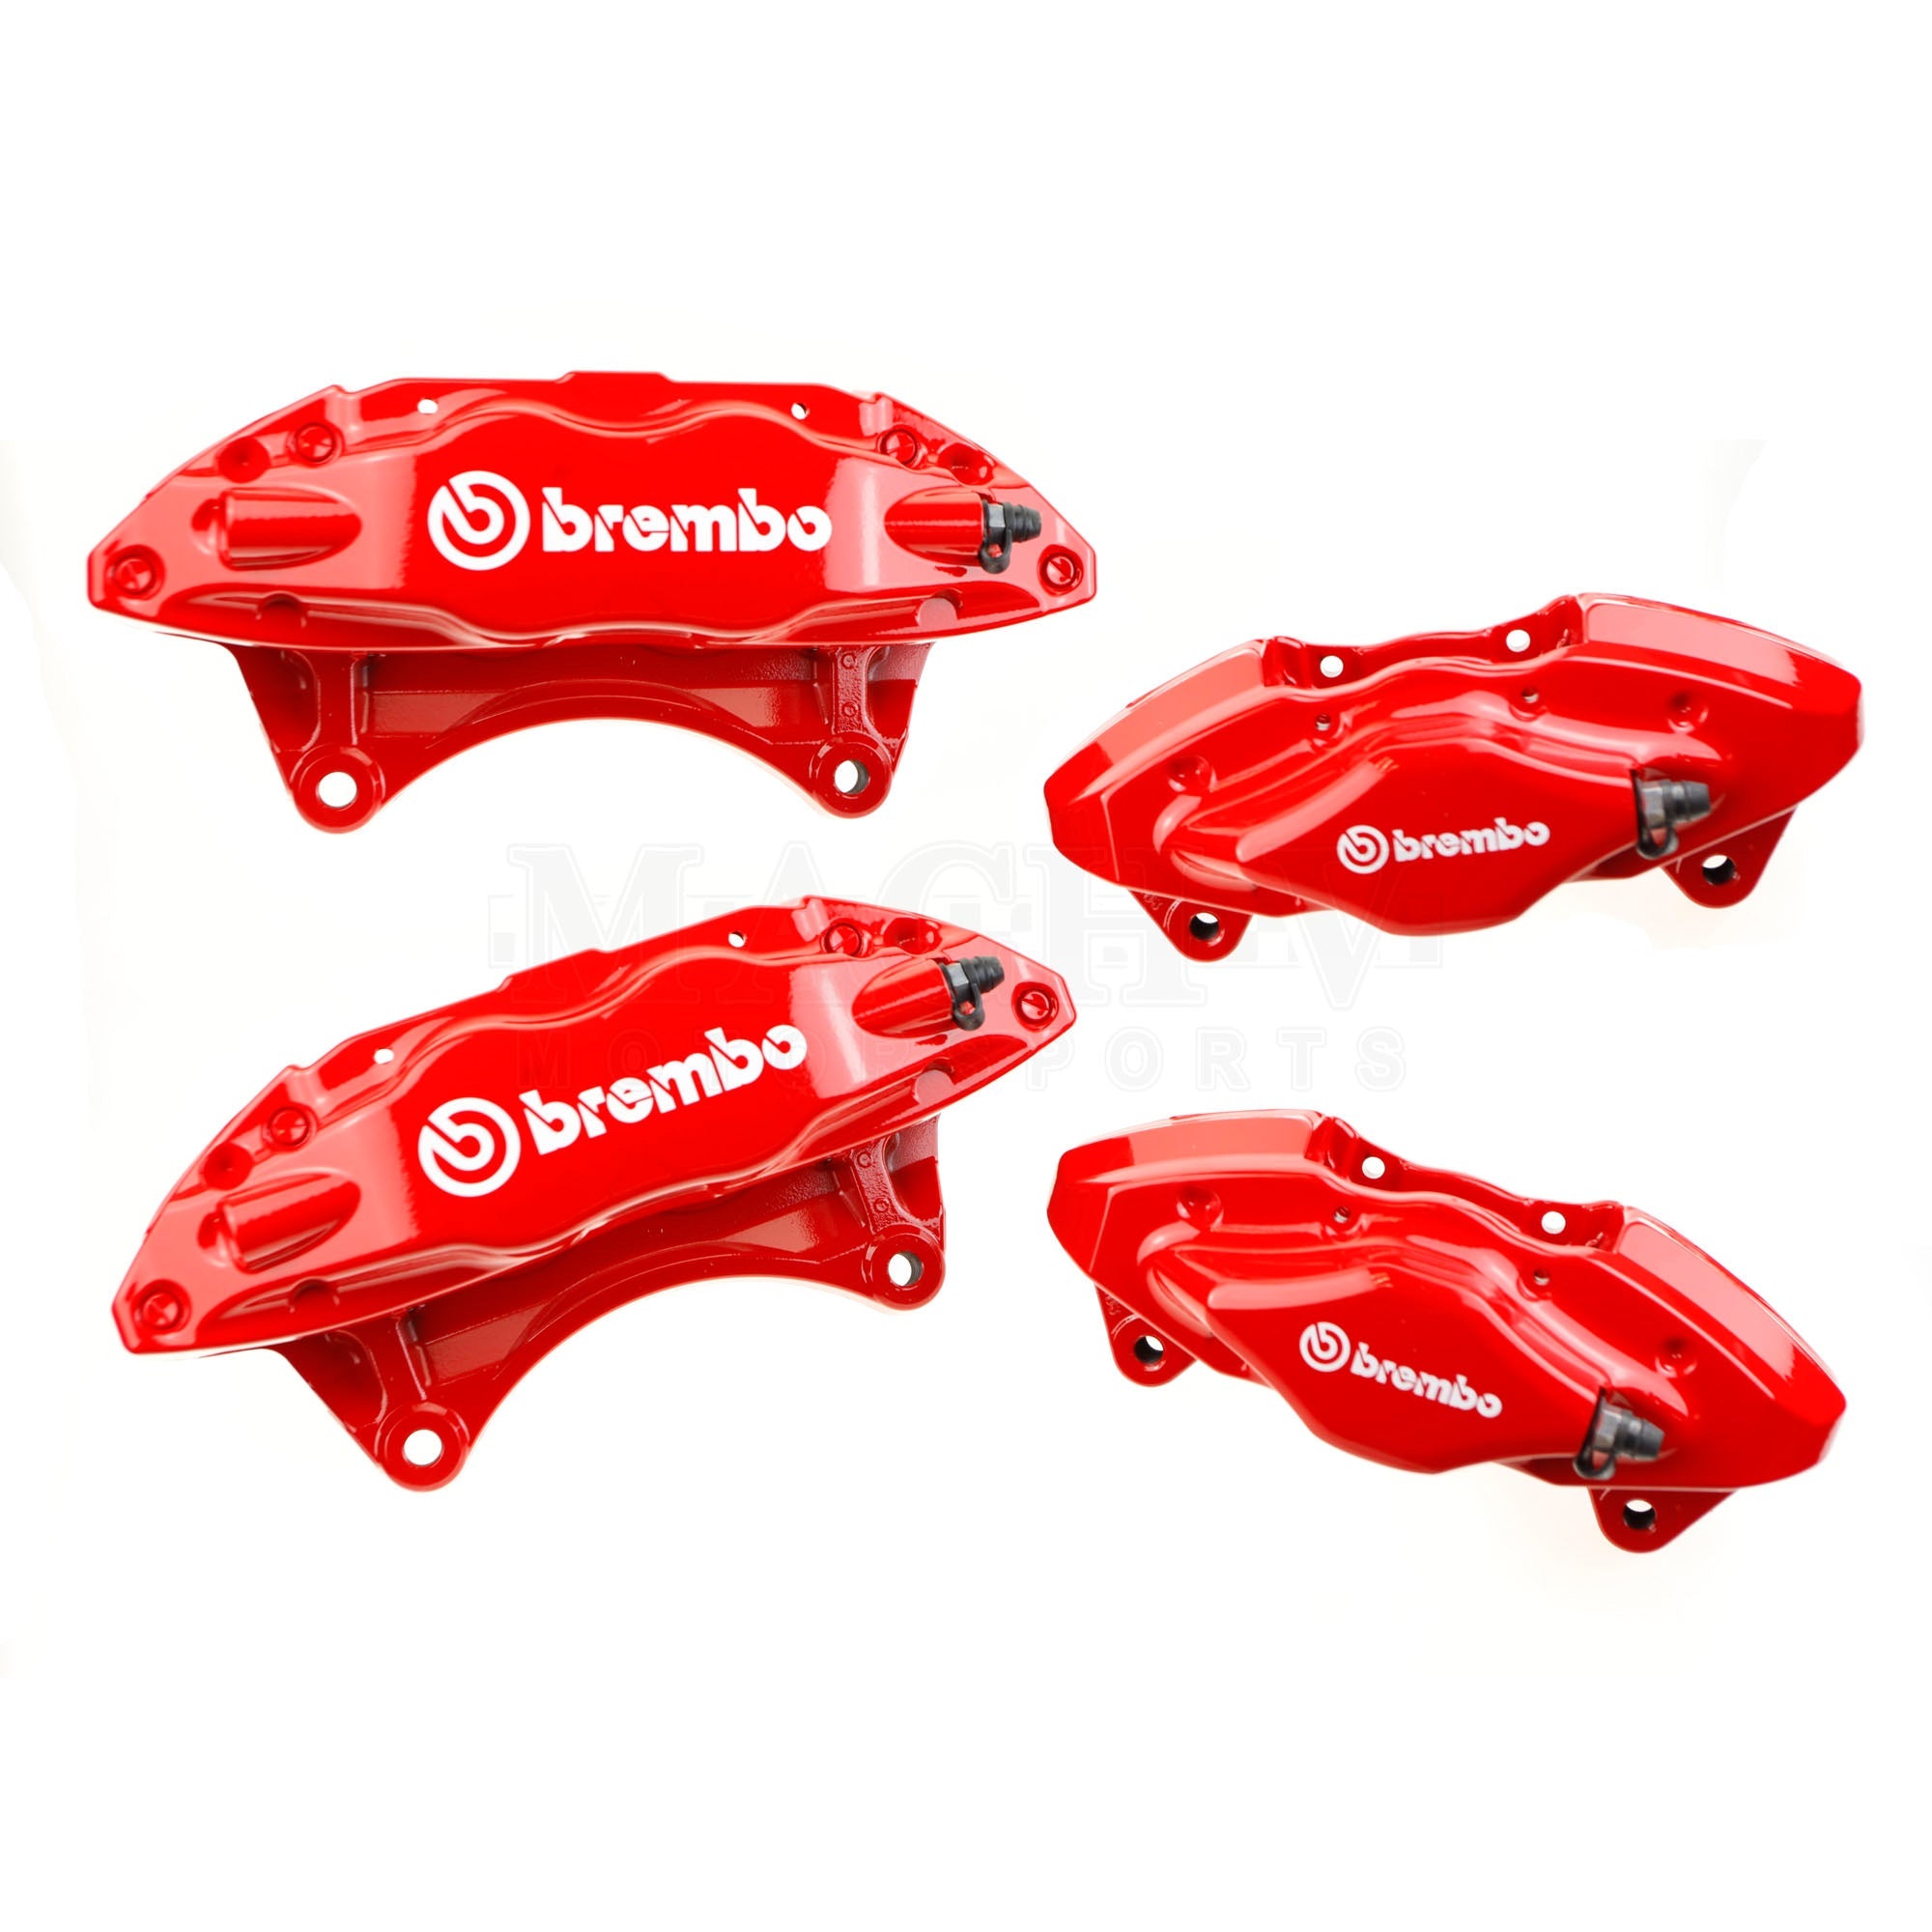 Subaru STI 4-Piston/2-Piston RED Brembo Brake Kit DELUXE with Stainless Lines and Slotted Rotors